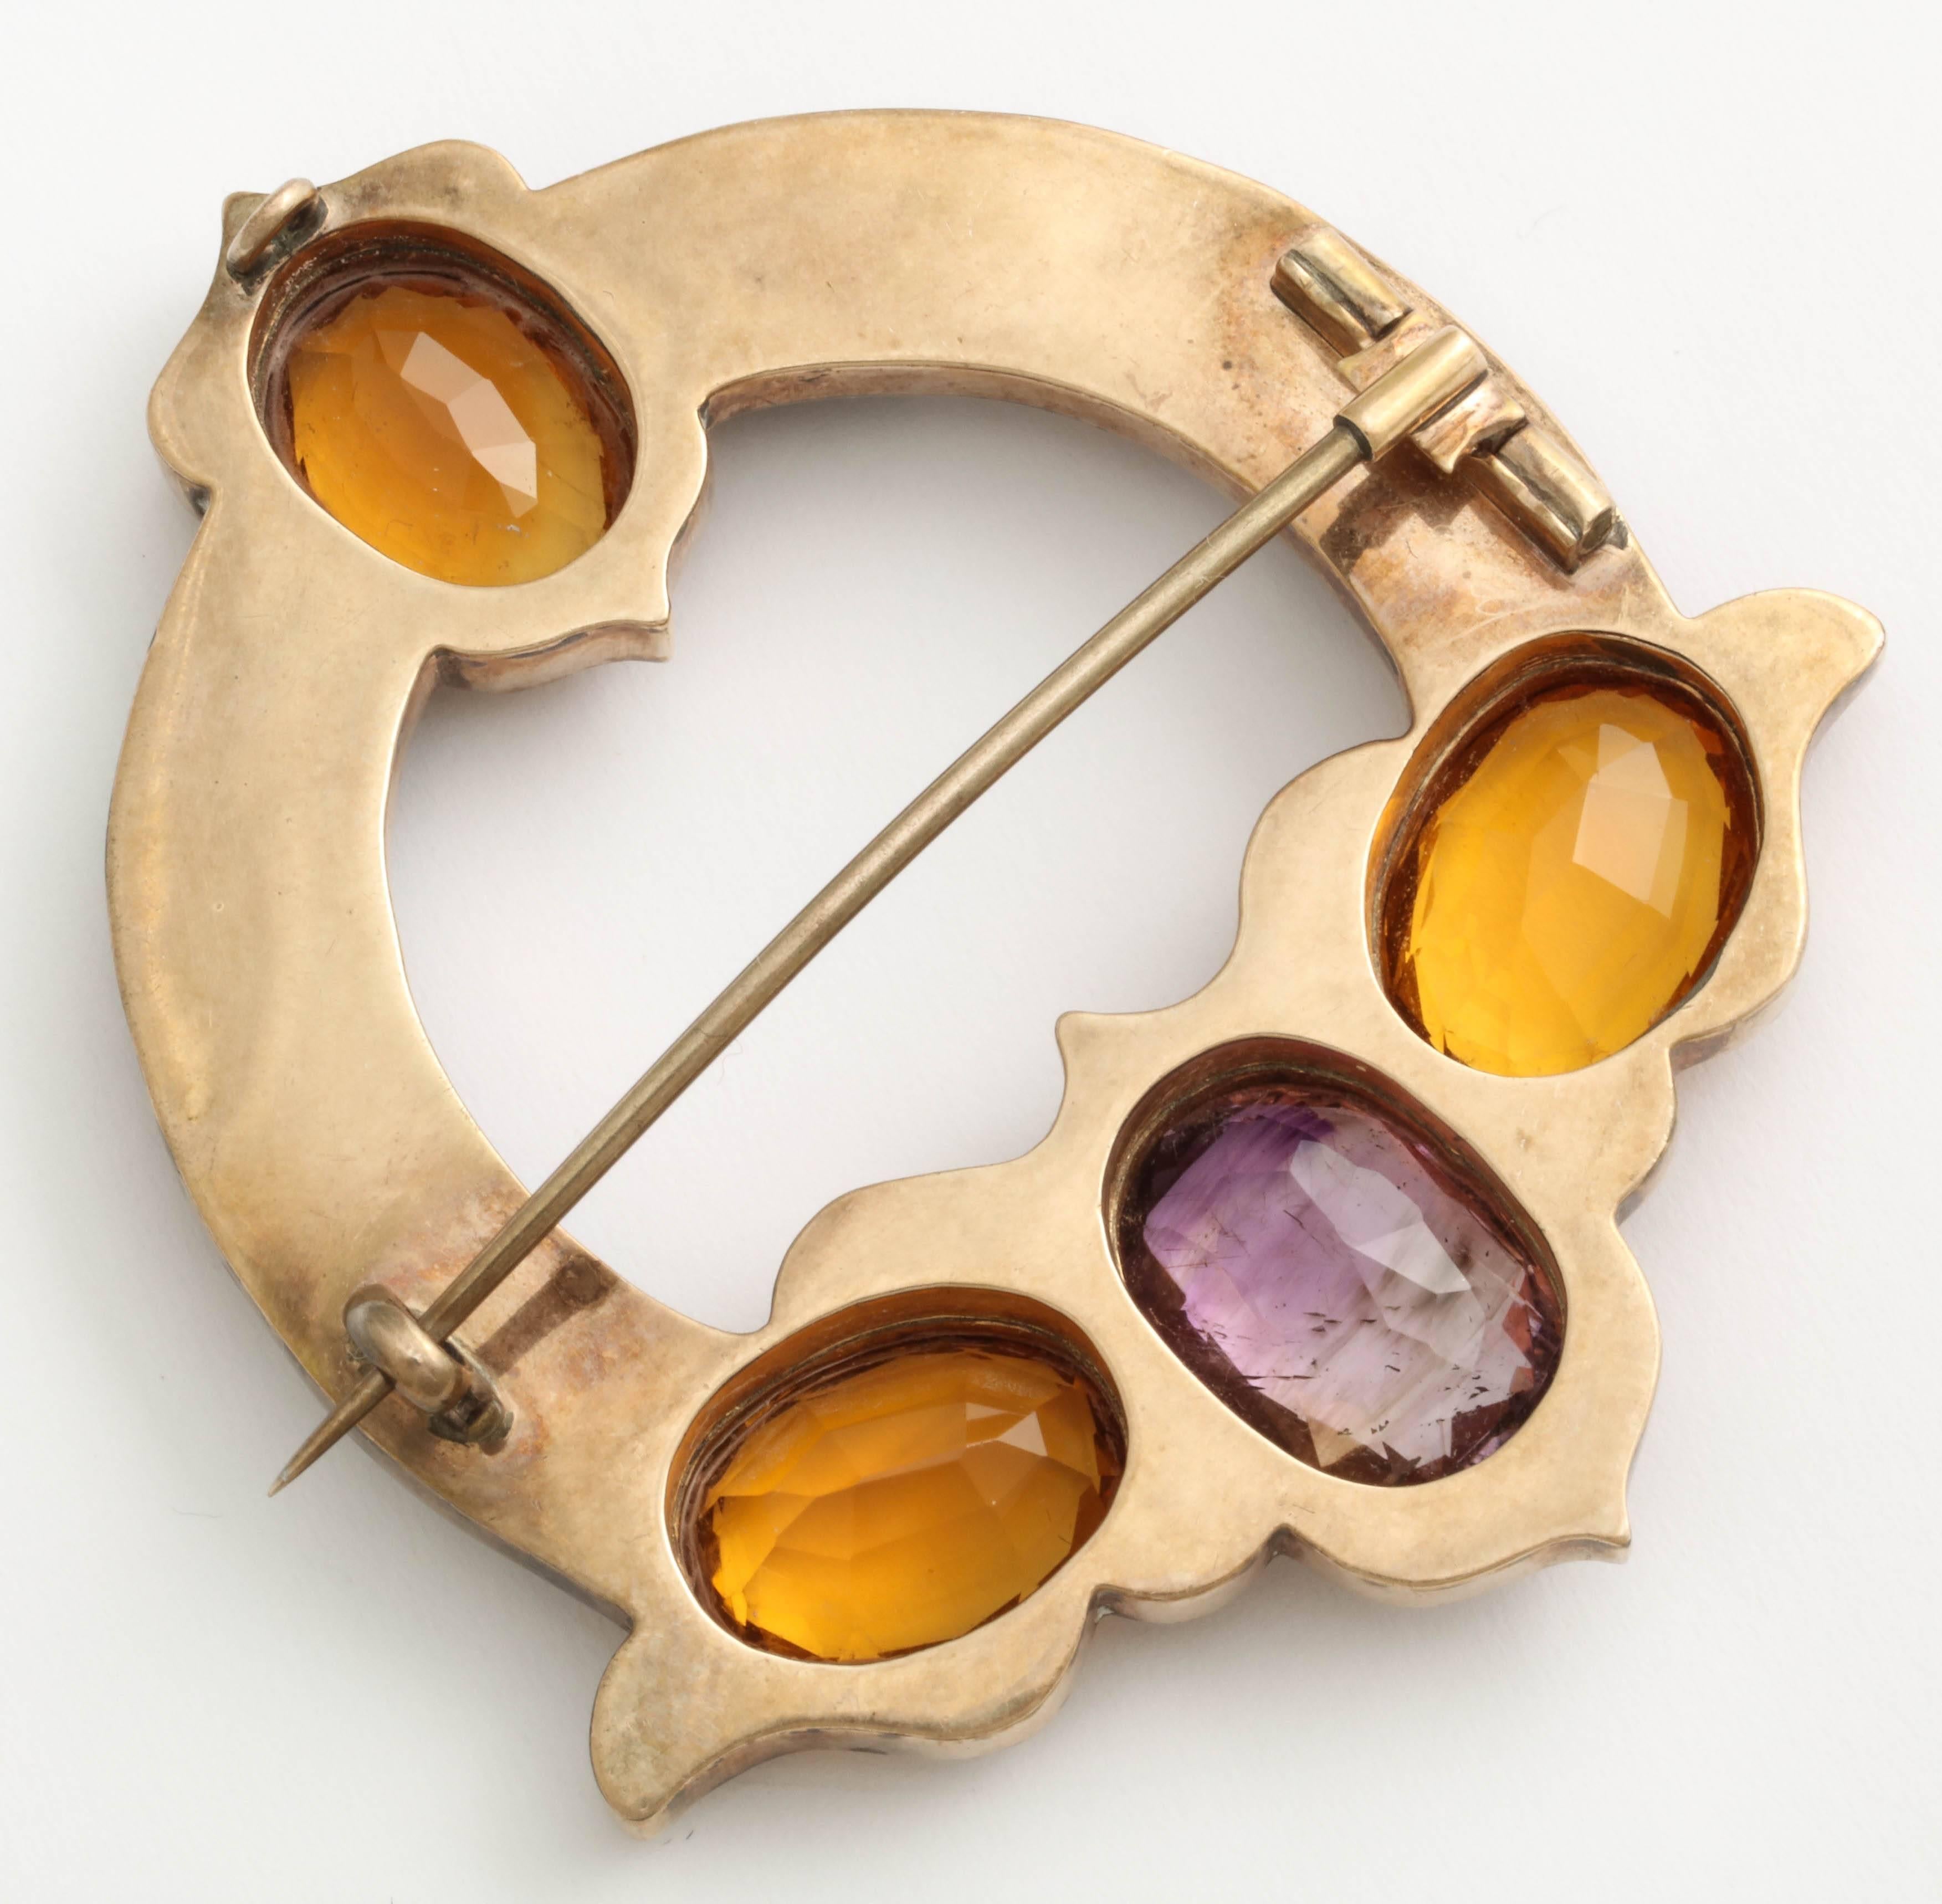 A beautiful example of Scottish agate jewelry, this gold brooch is set with six hardstones, citrine and amethyst. 